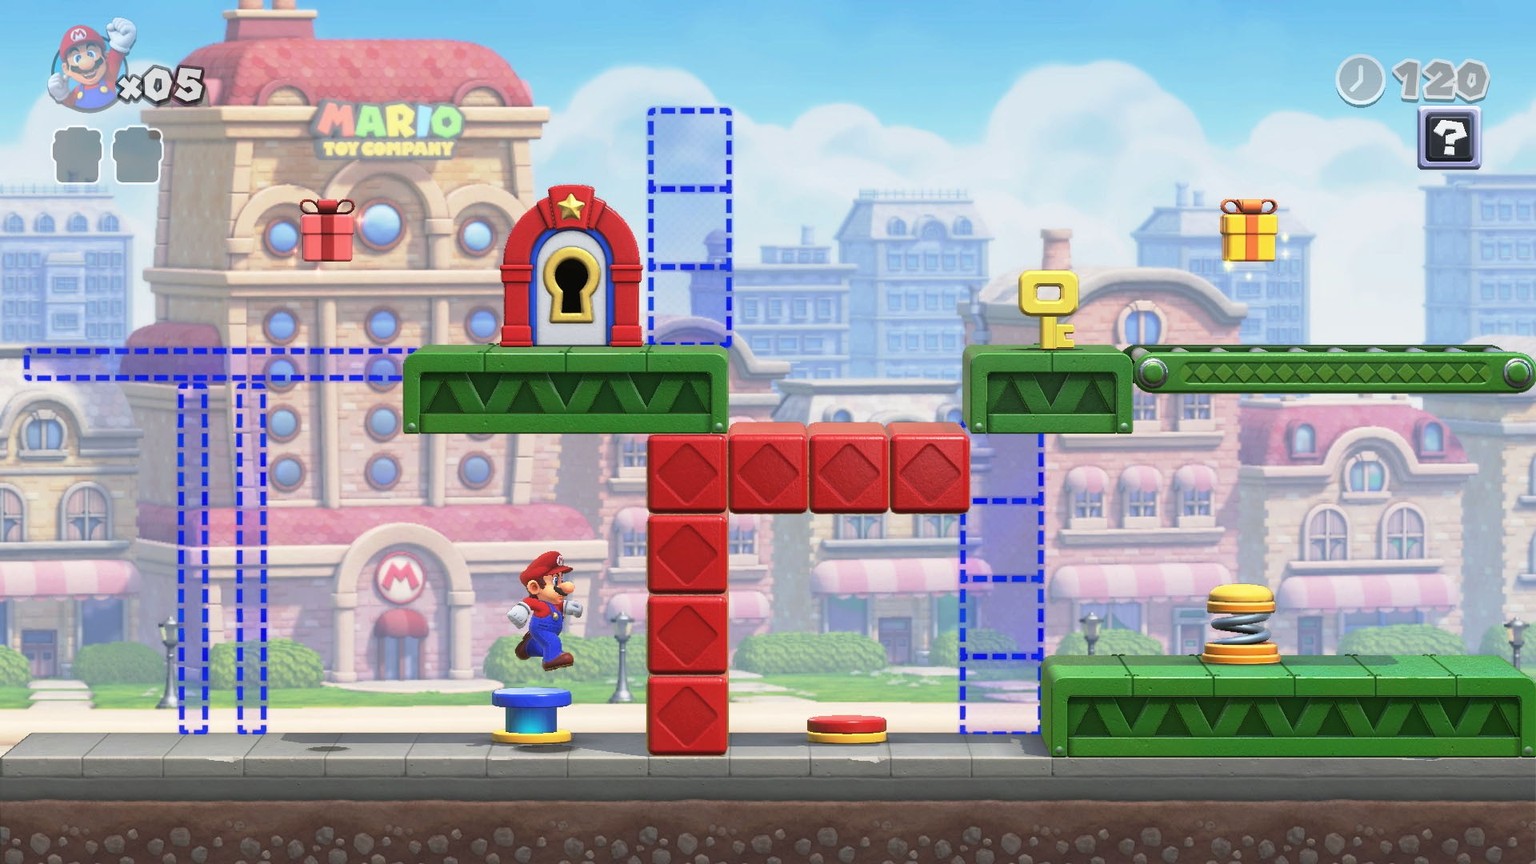 Super Mario must first grab the key before he can advance to the next level.